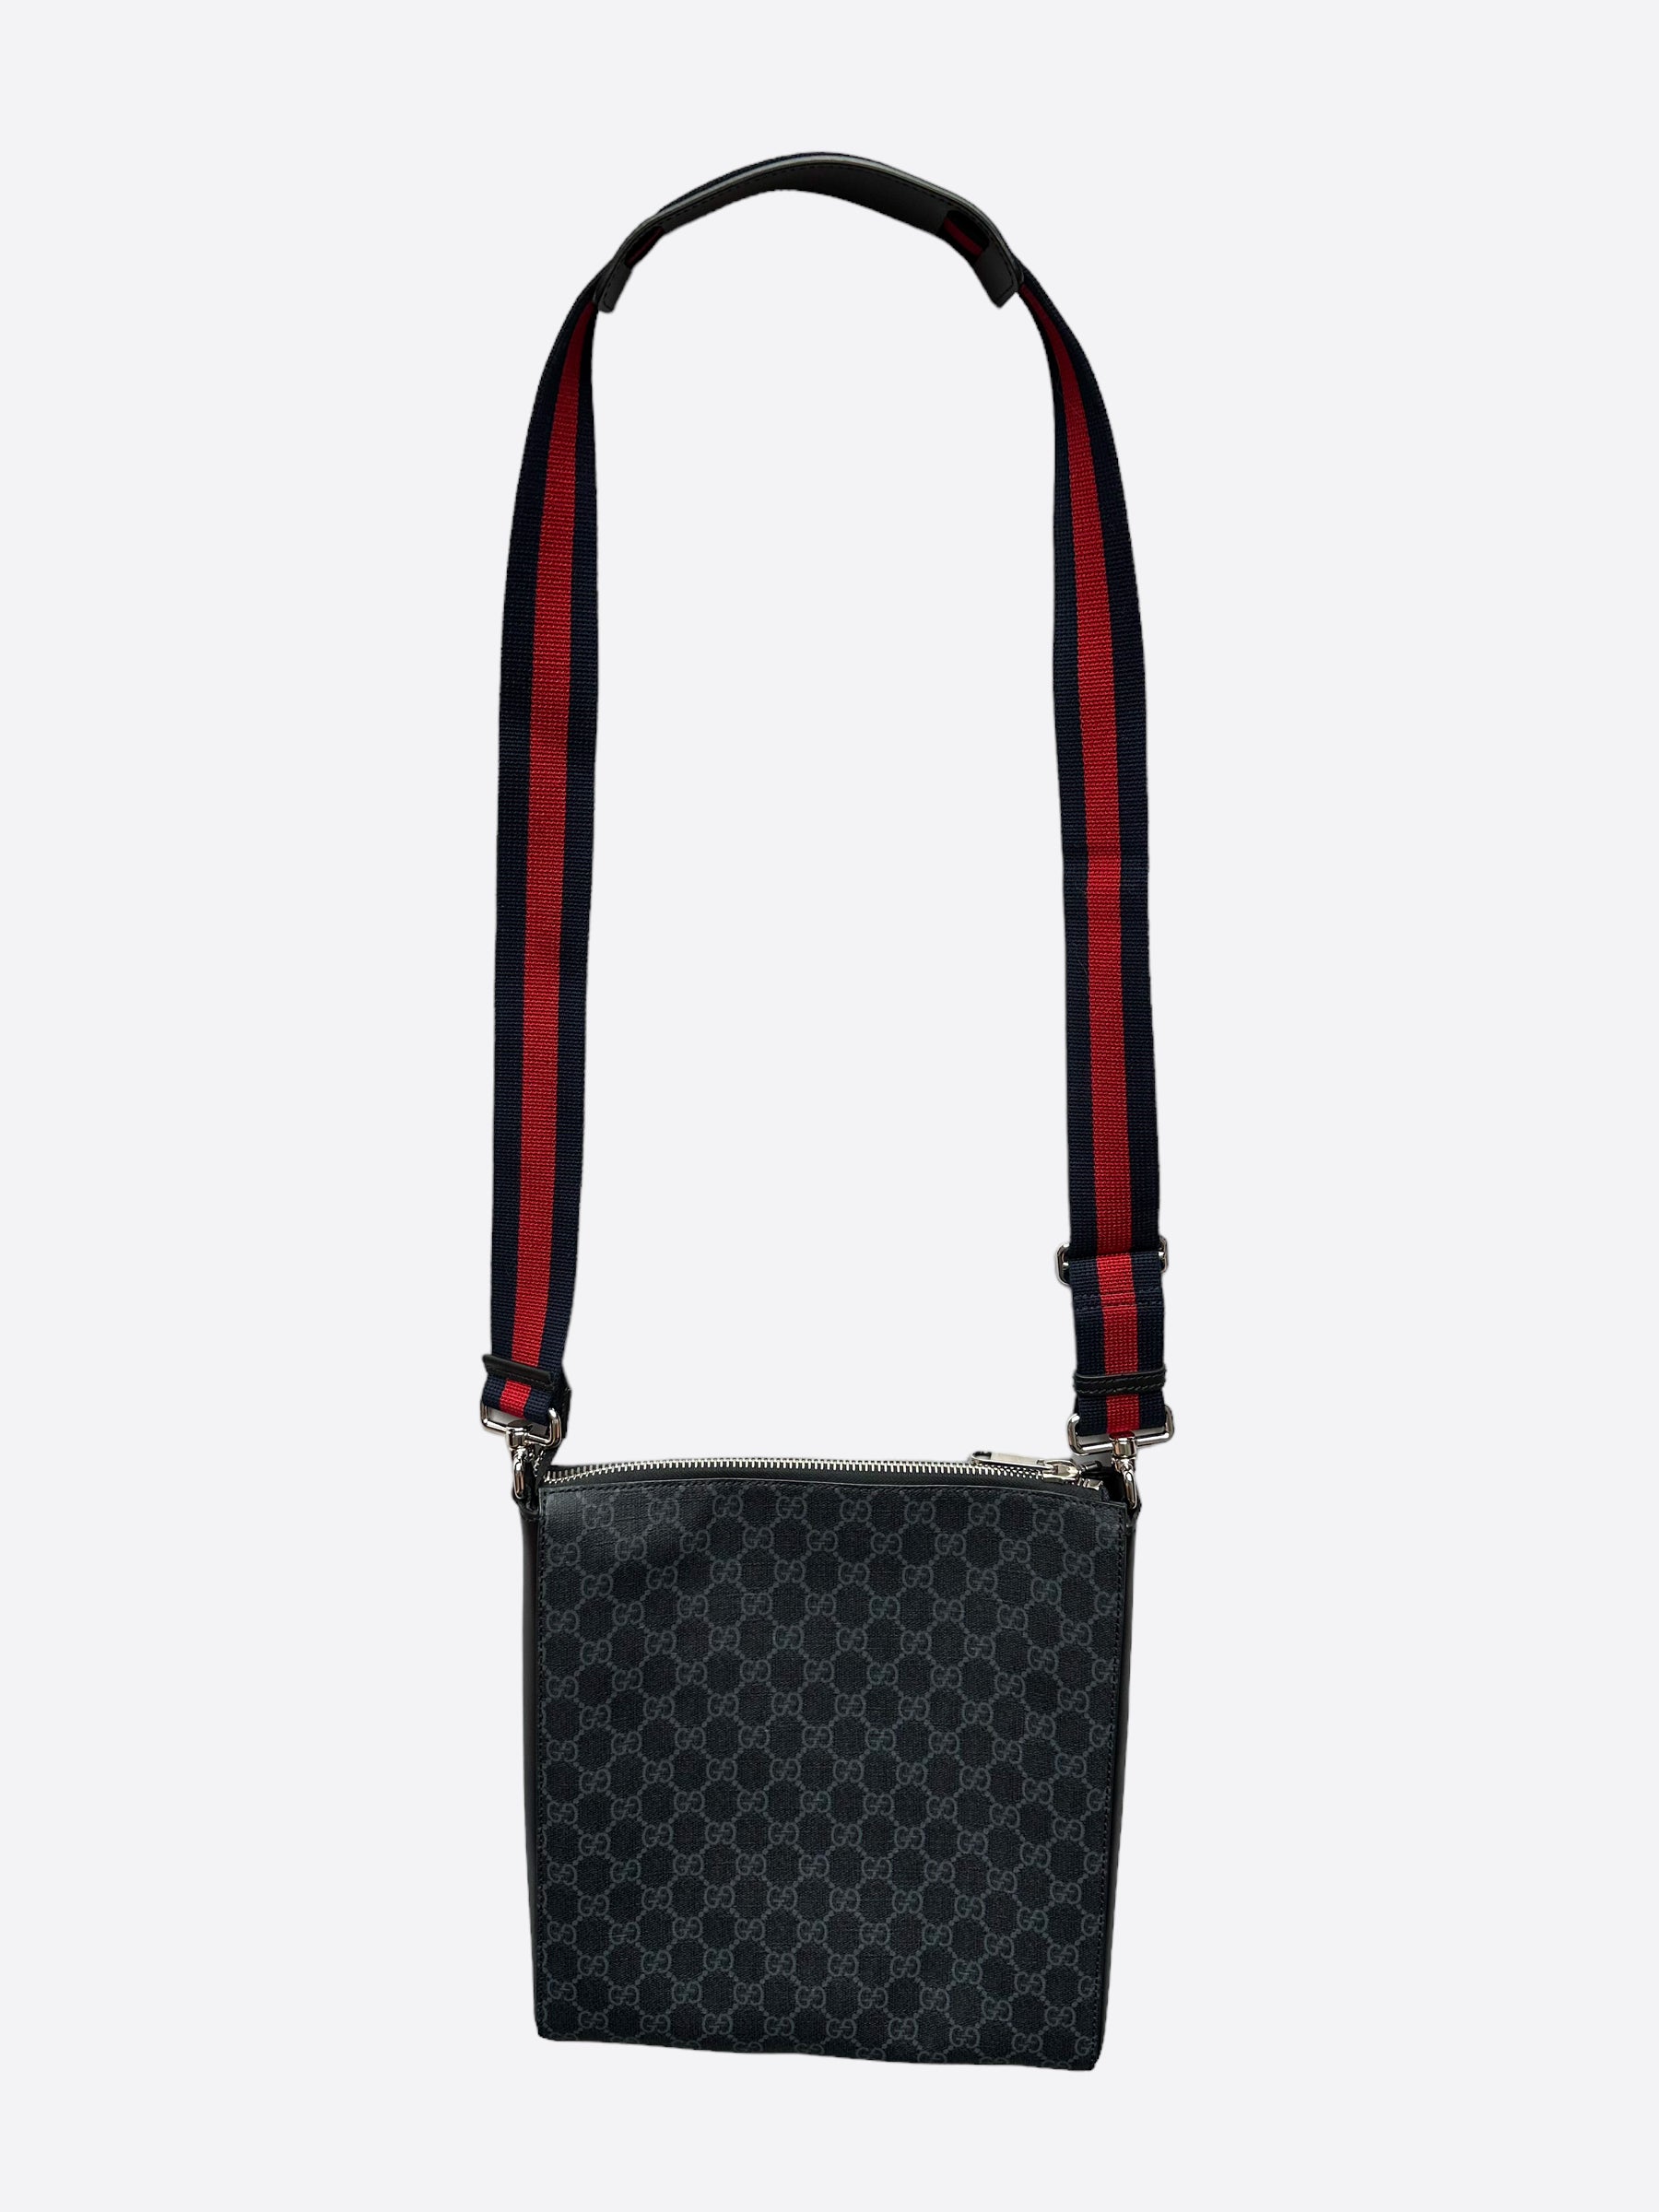 Gucci Men's GG Supreme Small Side Bag in Black | End Clothing